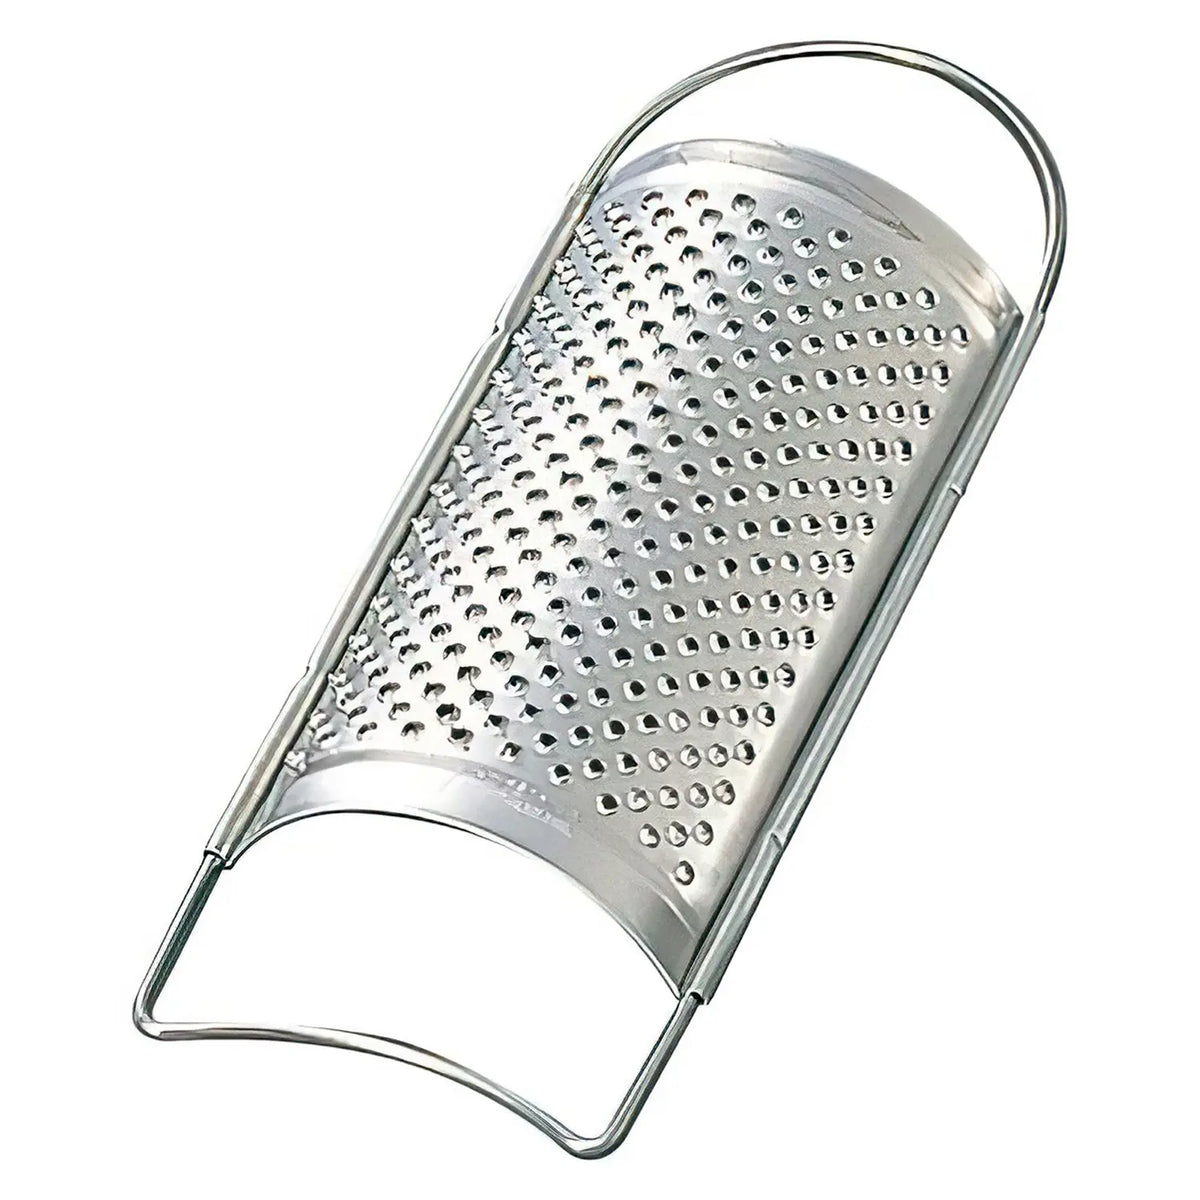  Kitchen Grater -Hchuang Nonstick Coating Stainless